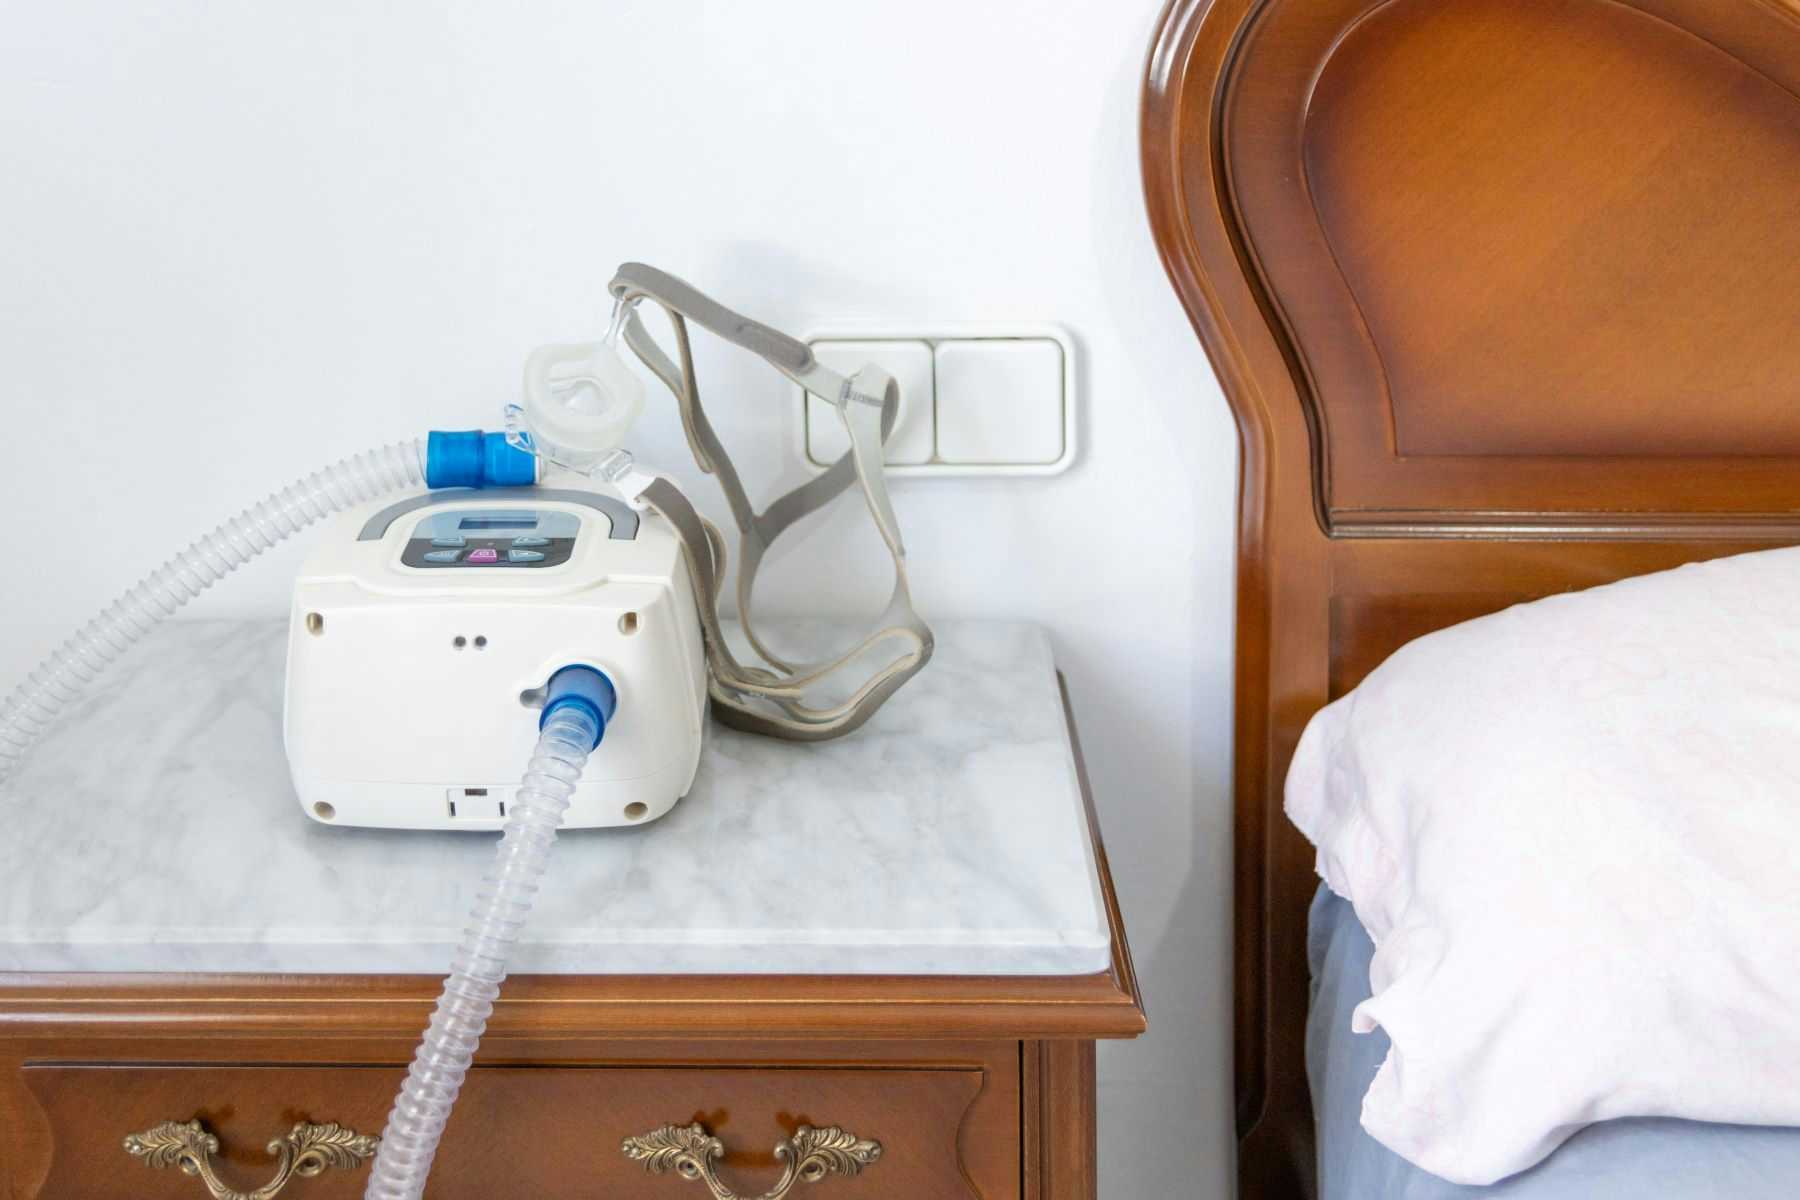 BiPAP machine on bedside table